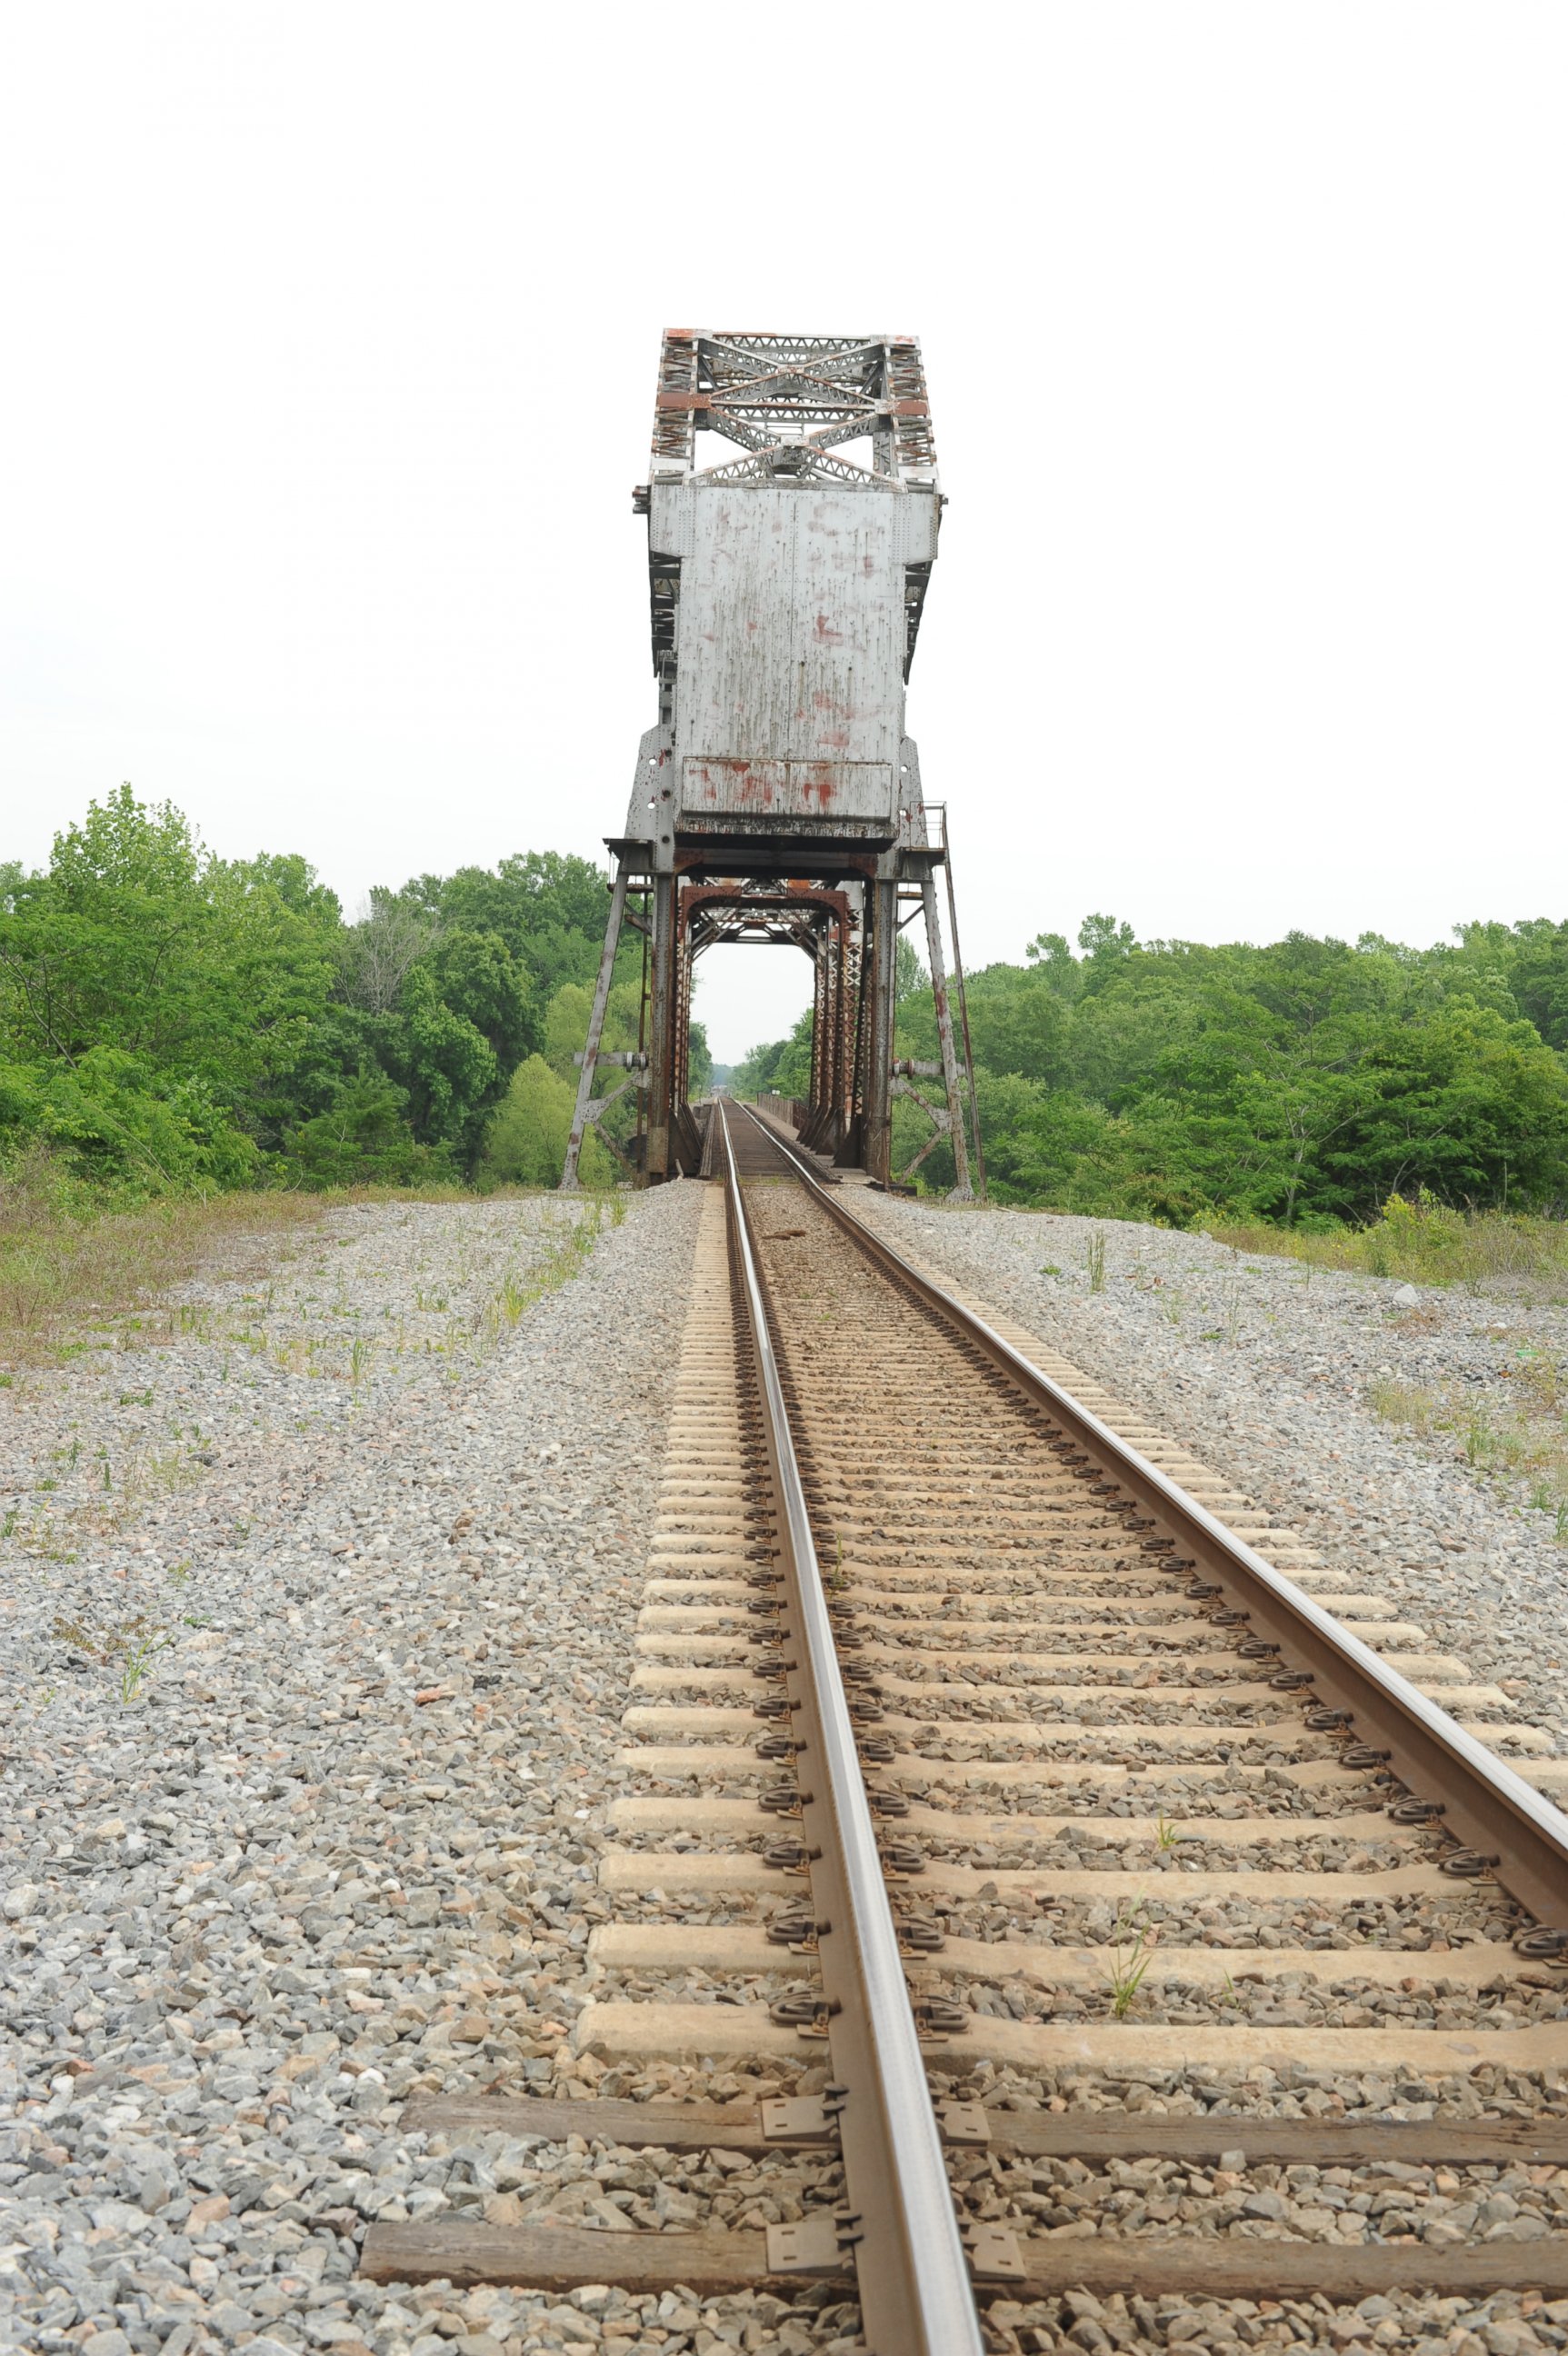 PHOTO: The "Midnight Rider" cast and crew were filming on this train trestle over the Altamaha River outside of Doctortown, Ga.